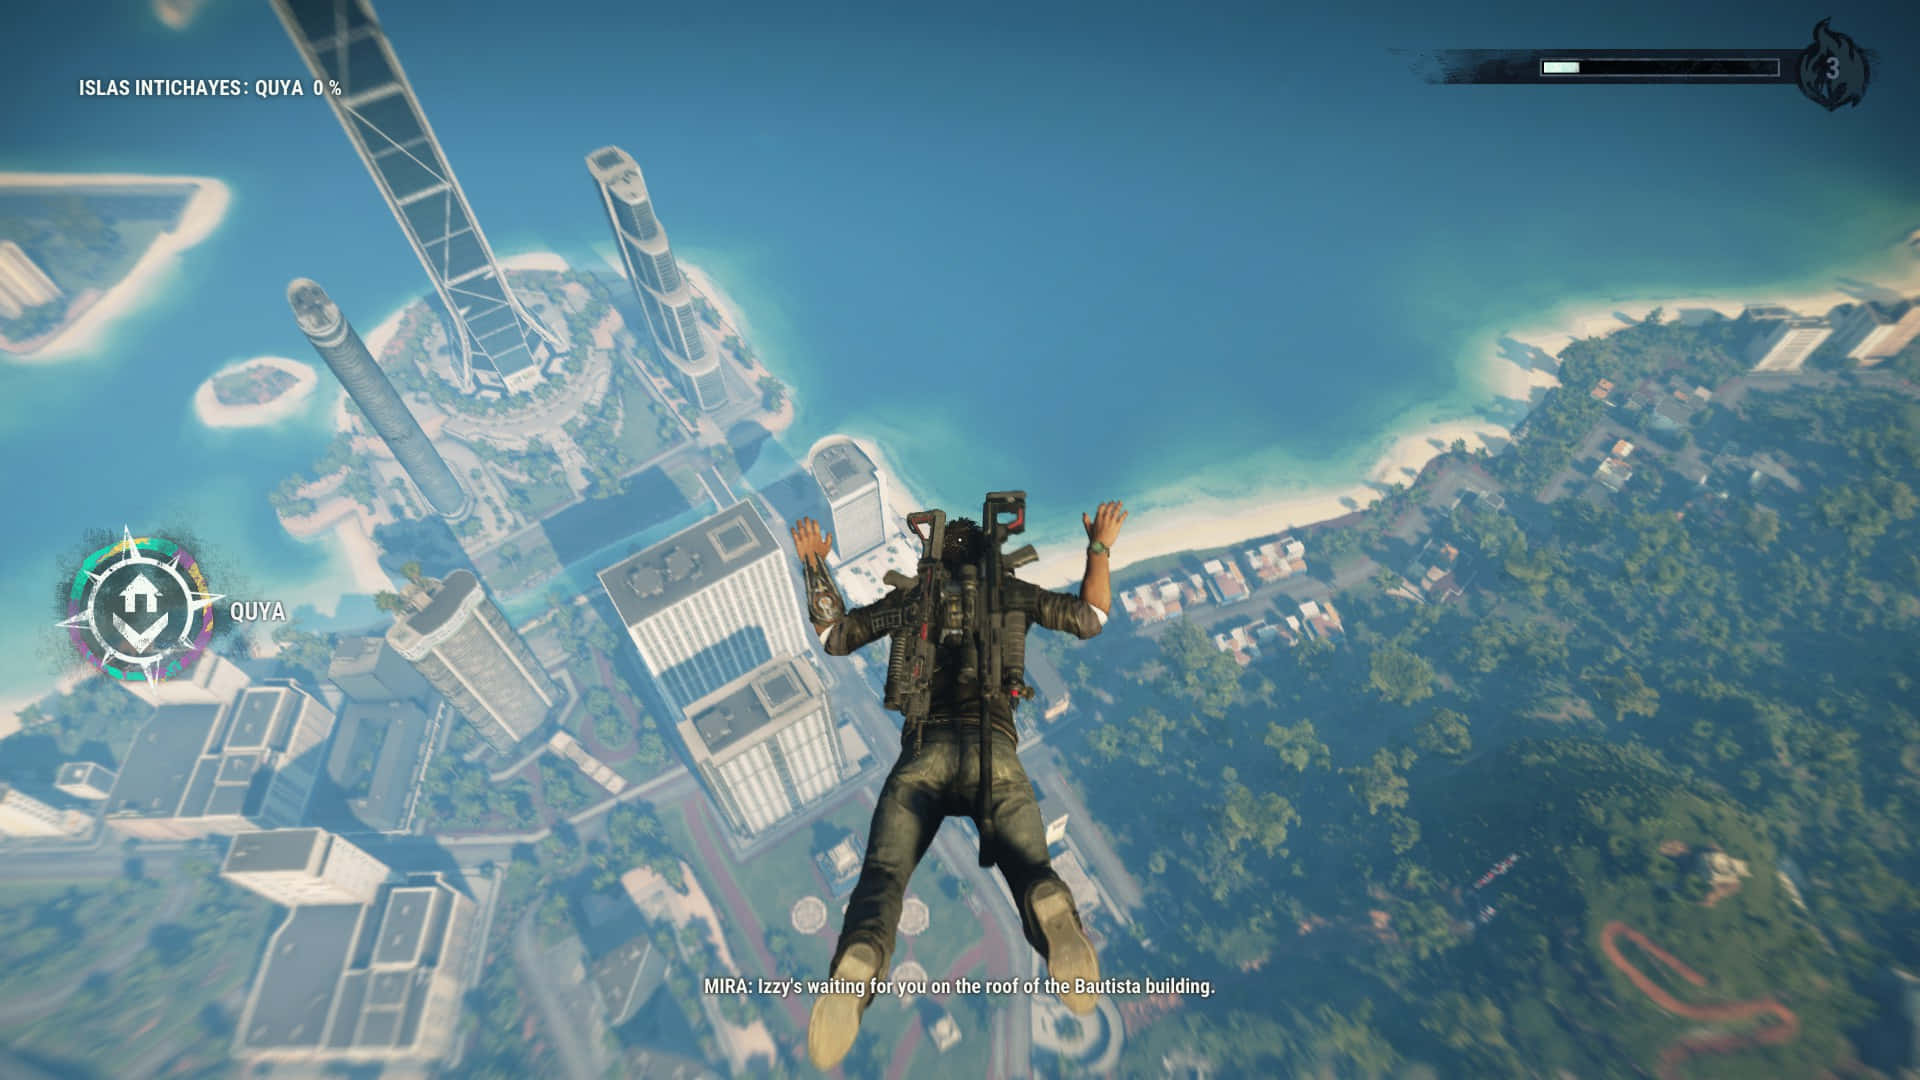 A Man Is Flying Over A City In A Video Game